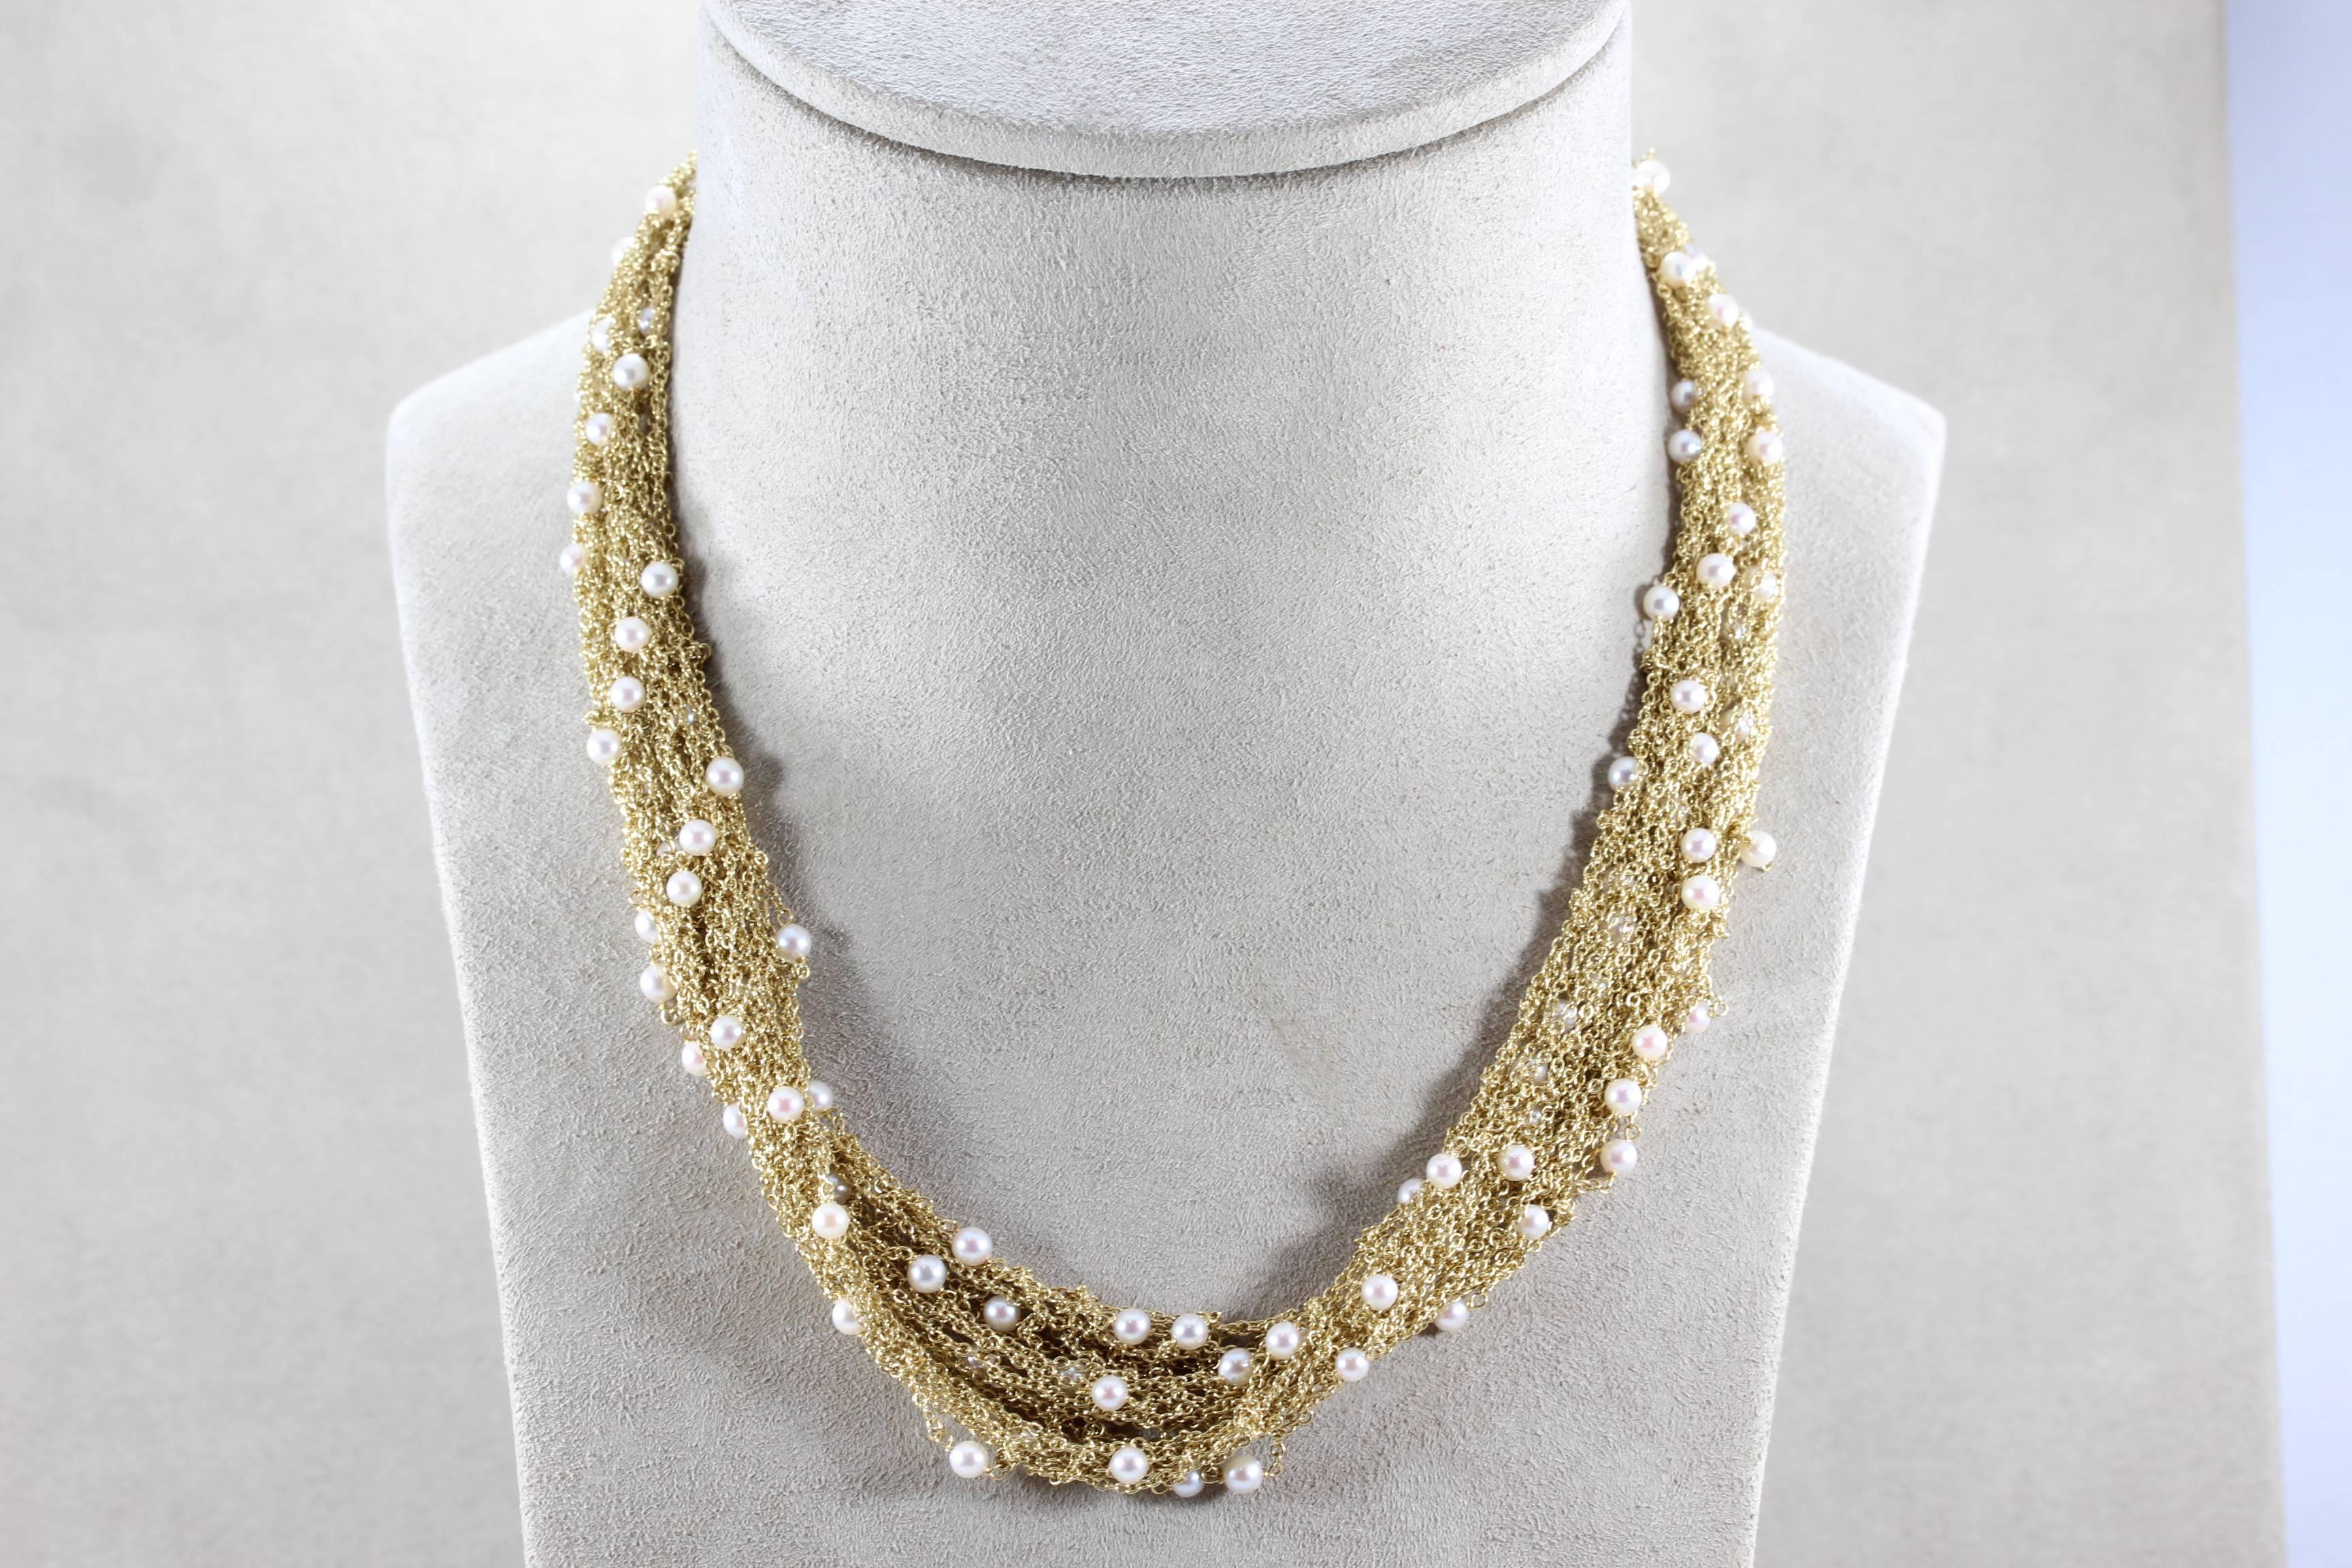 A delicate choker with seed pearls throughout a handmade 18K yellow gold soft mesh necklace. Handmade in Italy with fine craftsmanship and a seamless twist lock to secure its closure, a piece you will want to wear everyday. 

Length: 16 inches
